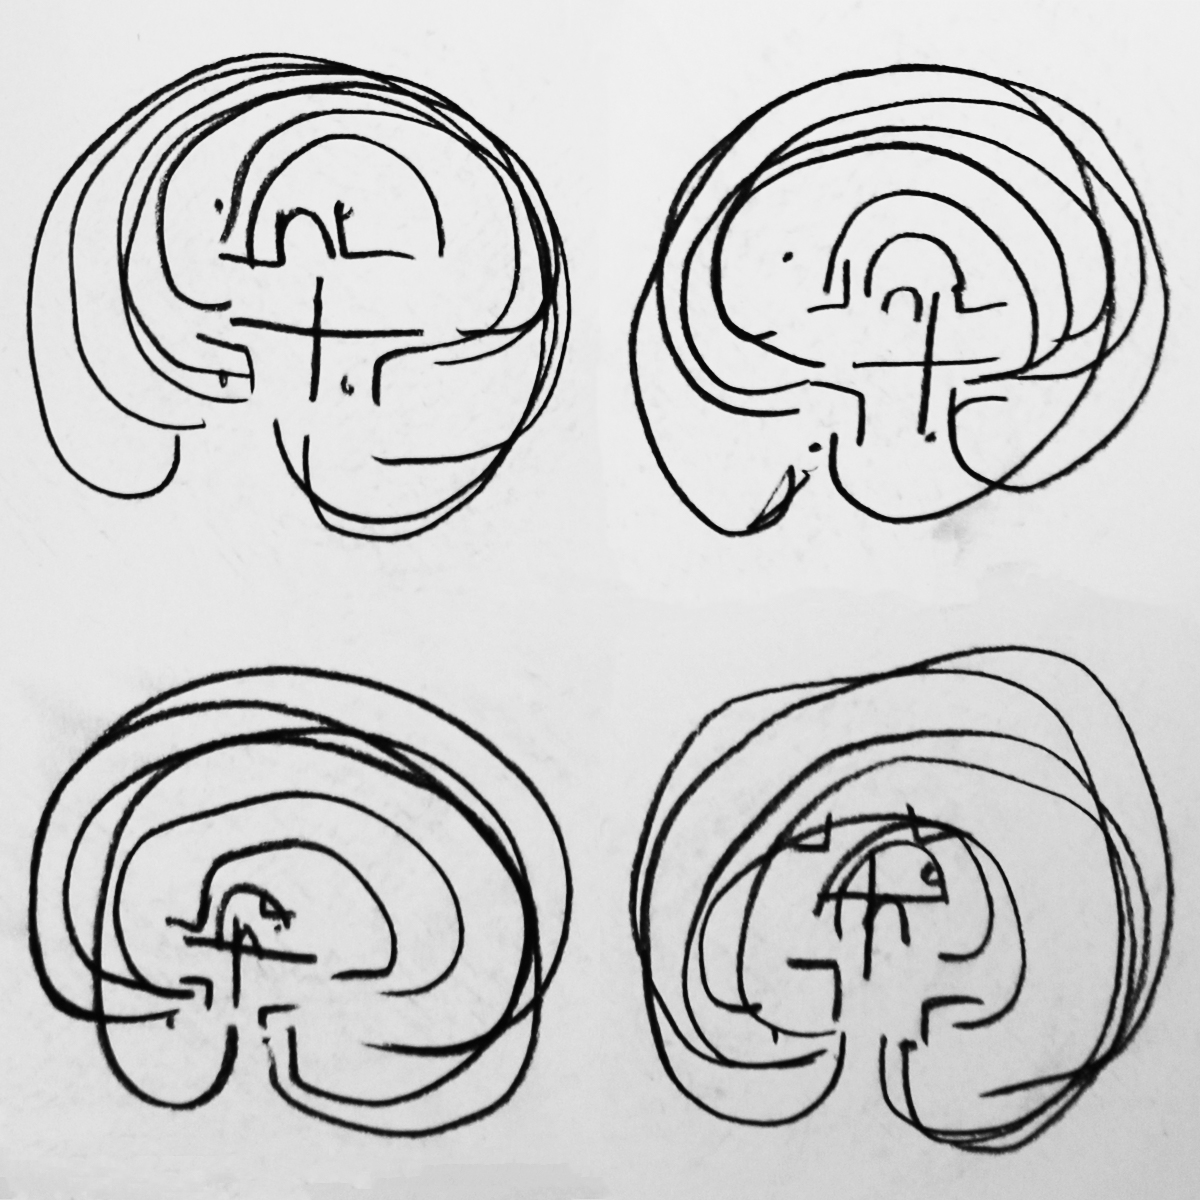 Four charcoal drawings of classic labyrinths in a 2x2 grid. The drawings have been done without looking at the paper, giving a disjointed and messy appearance.